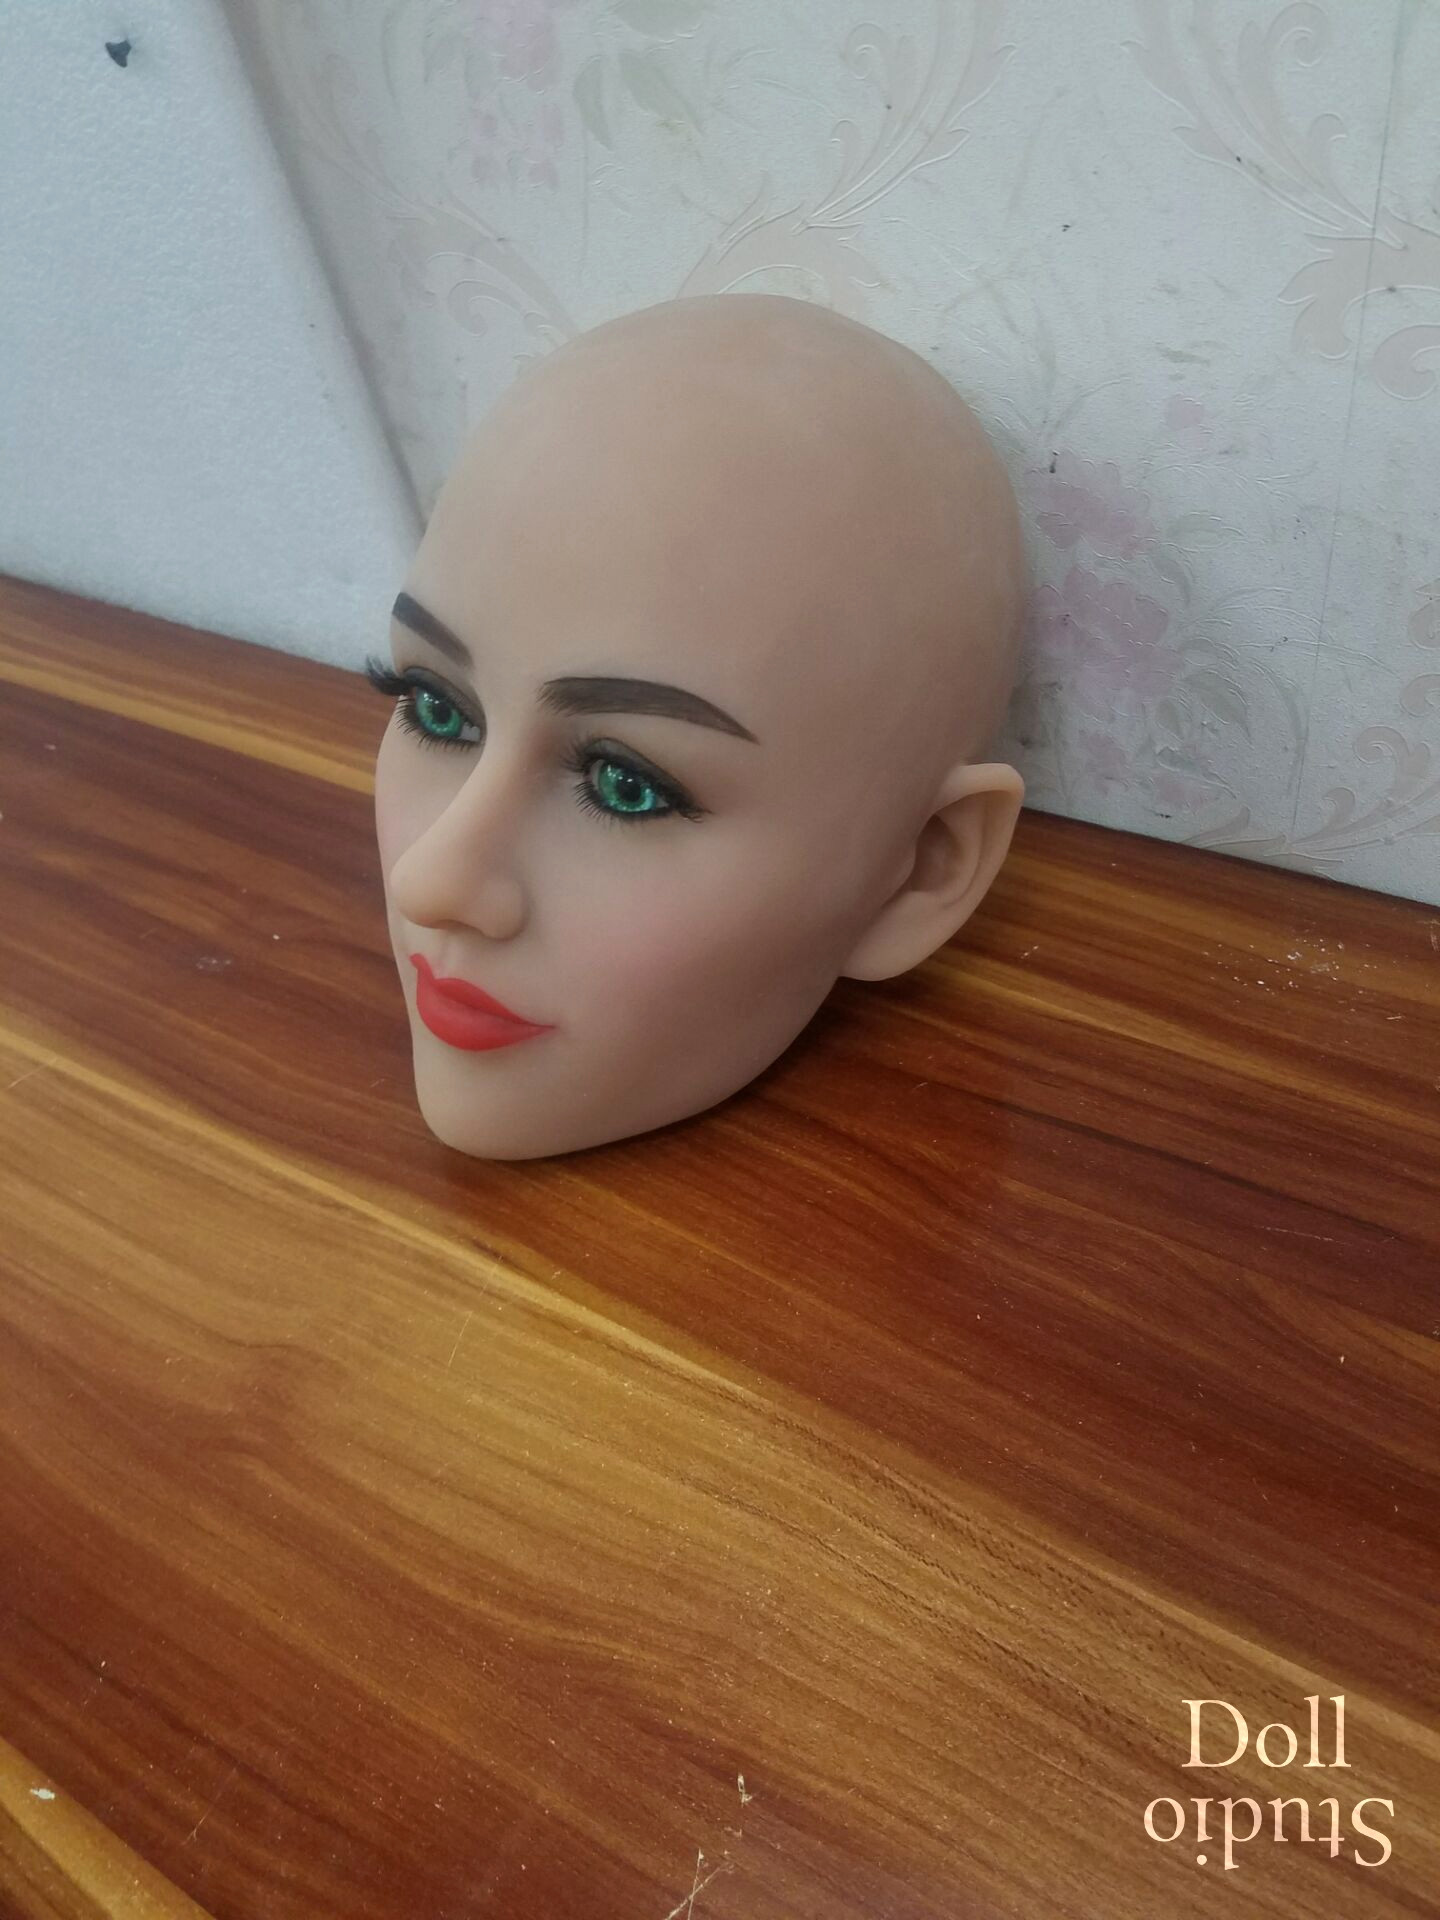 doll with no head